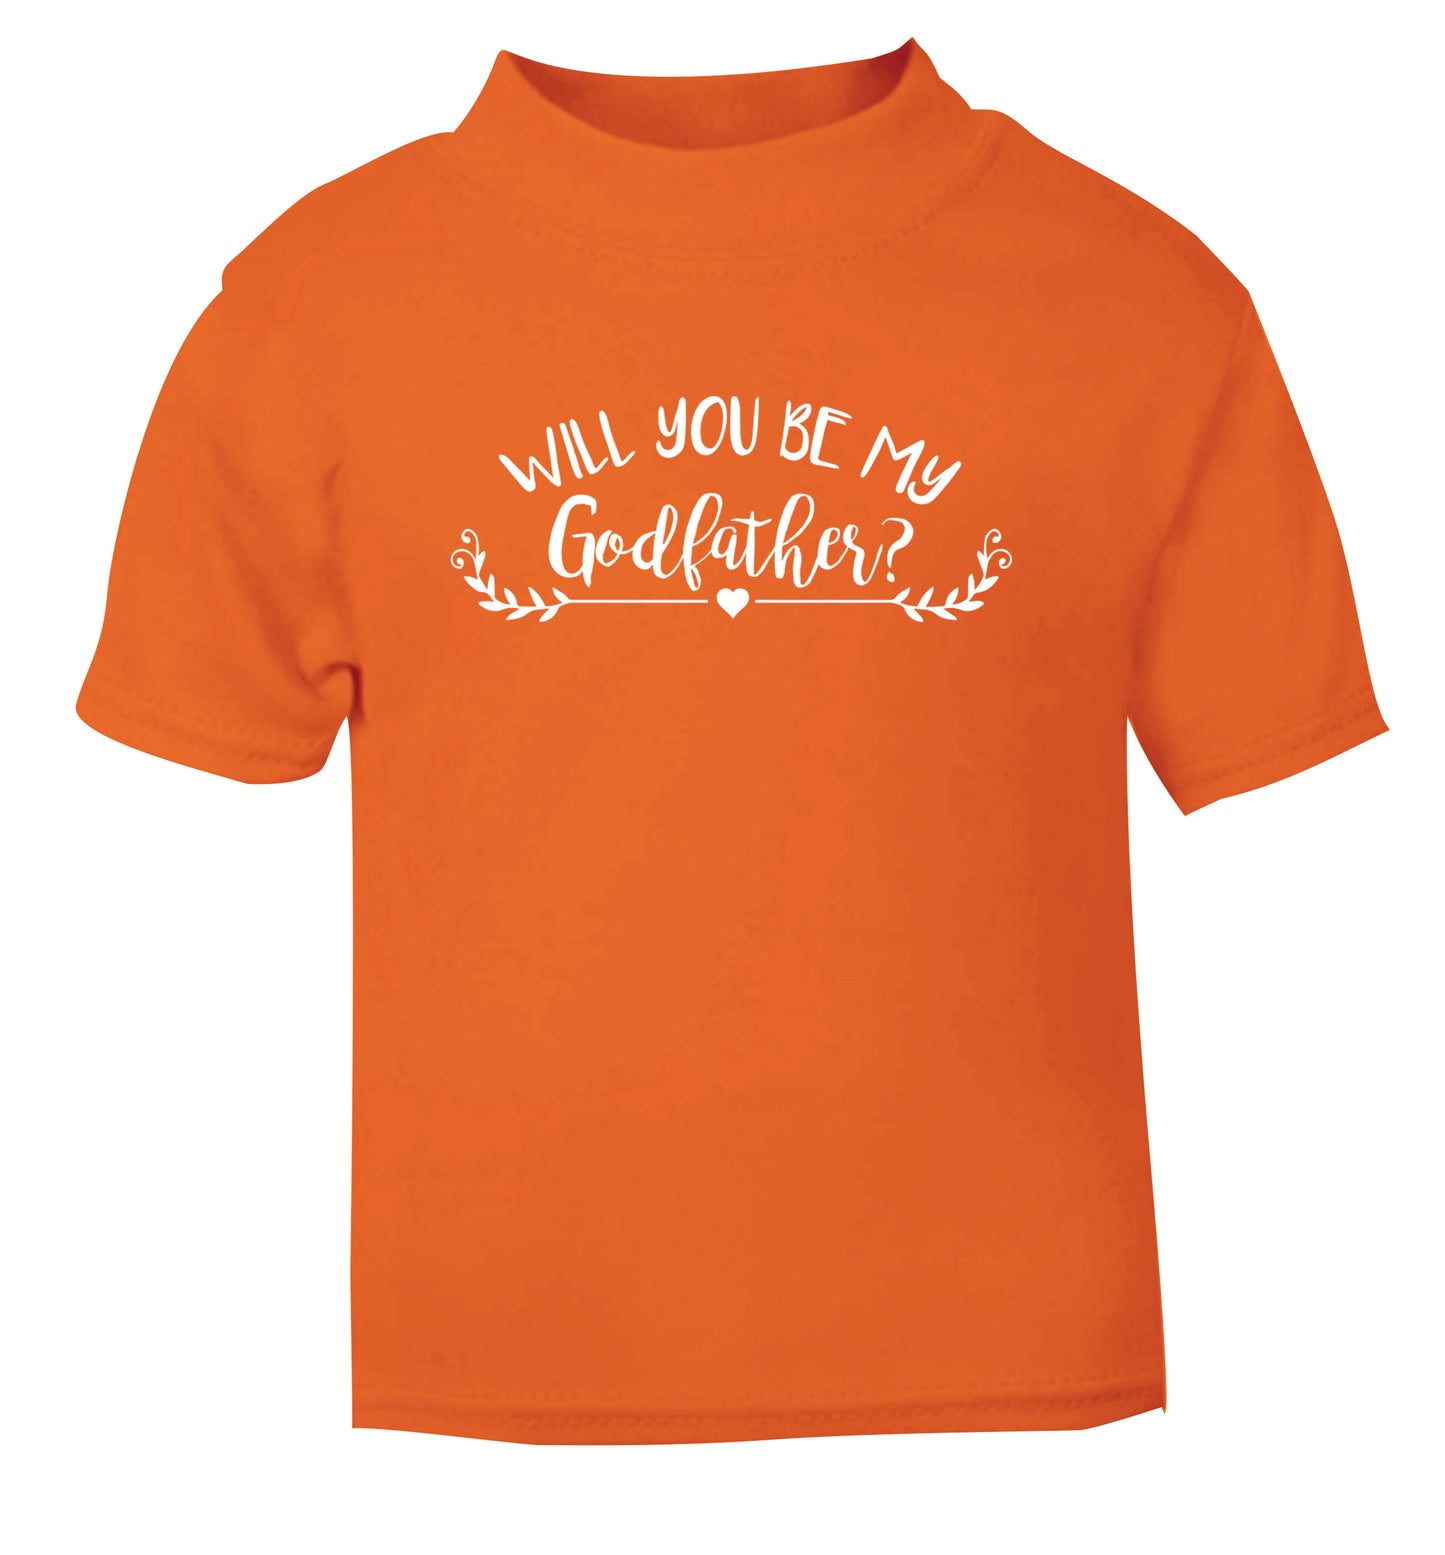 Will you be my godfather? orange Baby Toddler Tshirt 2 Years